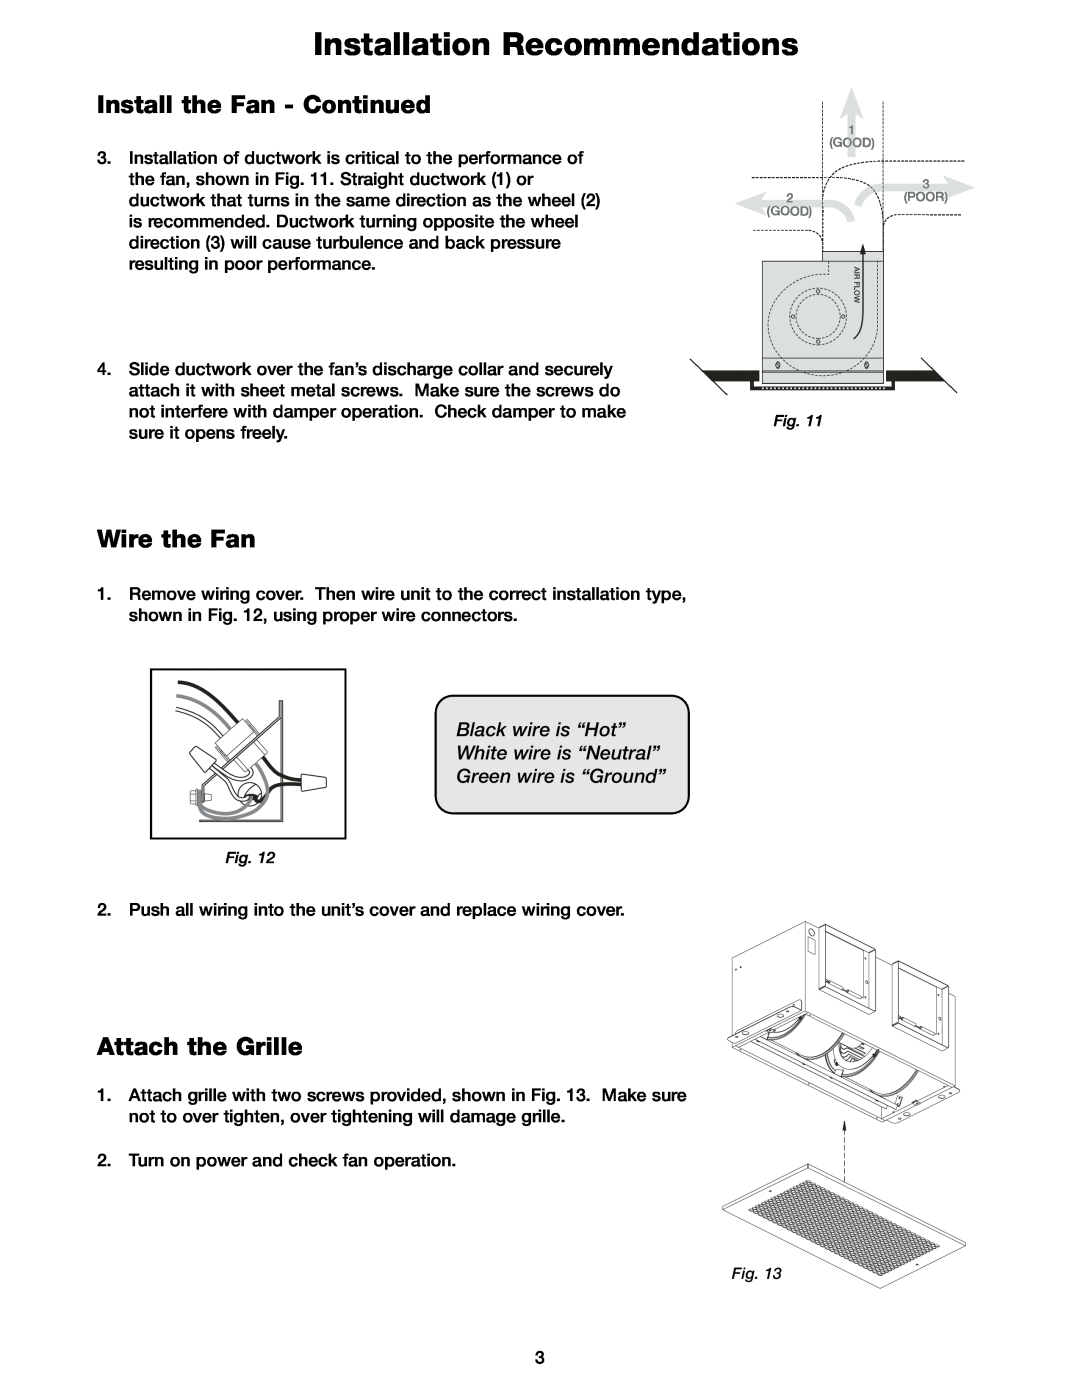 Greenheck Fan CSP-A700 manual Install the Fan - Continued, Wire the Fan, Attach the Grille, Installation Recommendations 